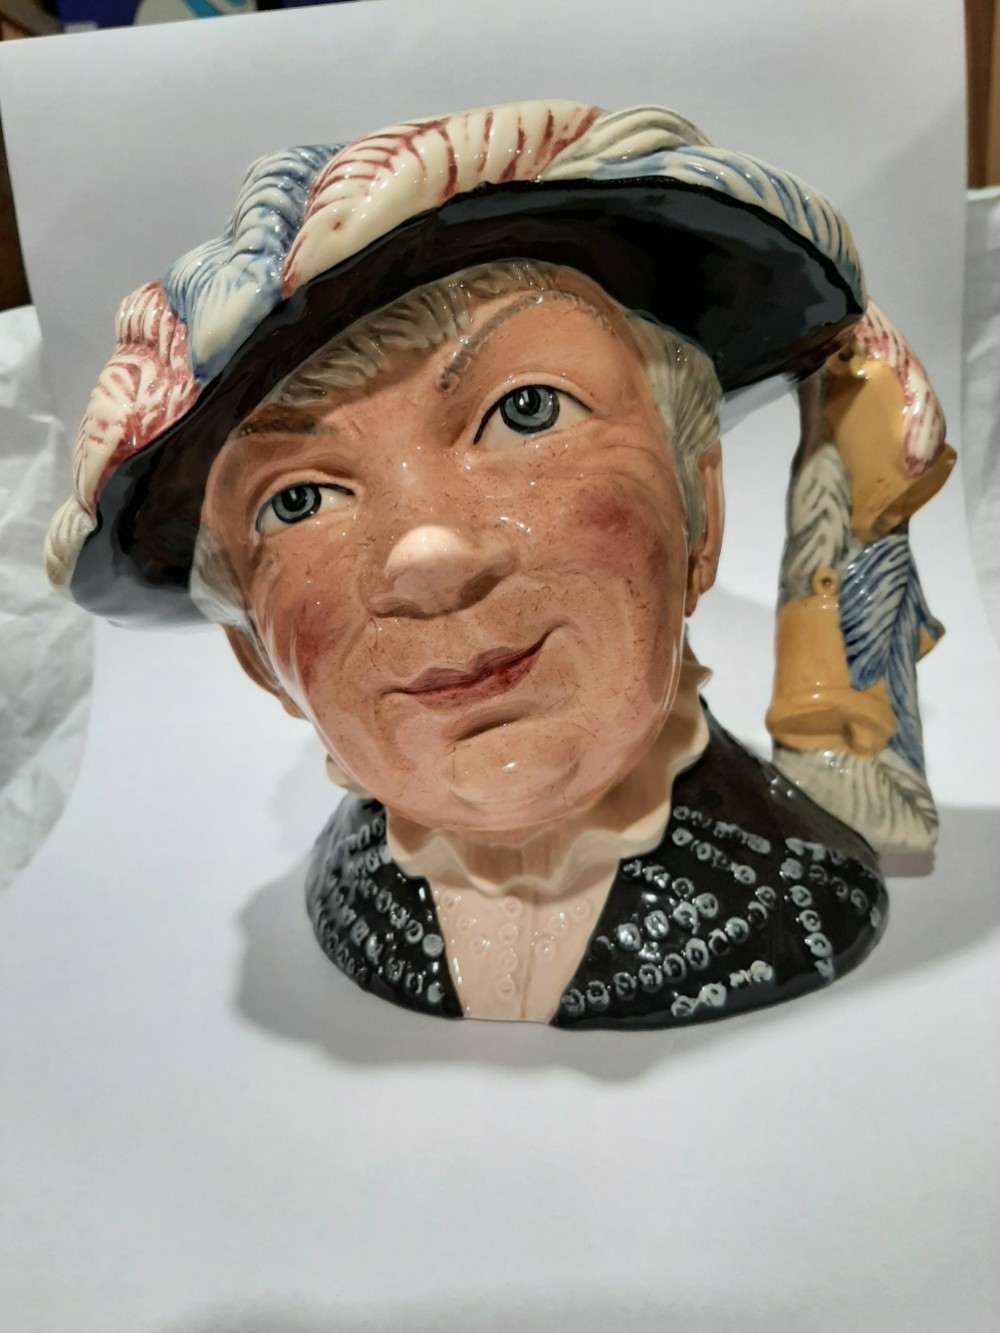 Pearly Queen, D 6759, $70.00, Royal Doulton Jug